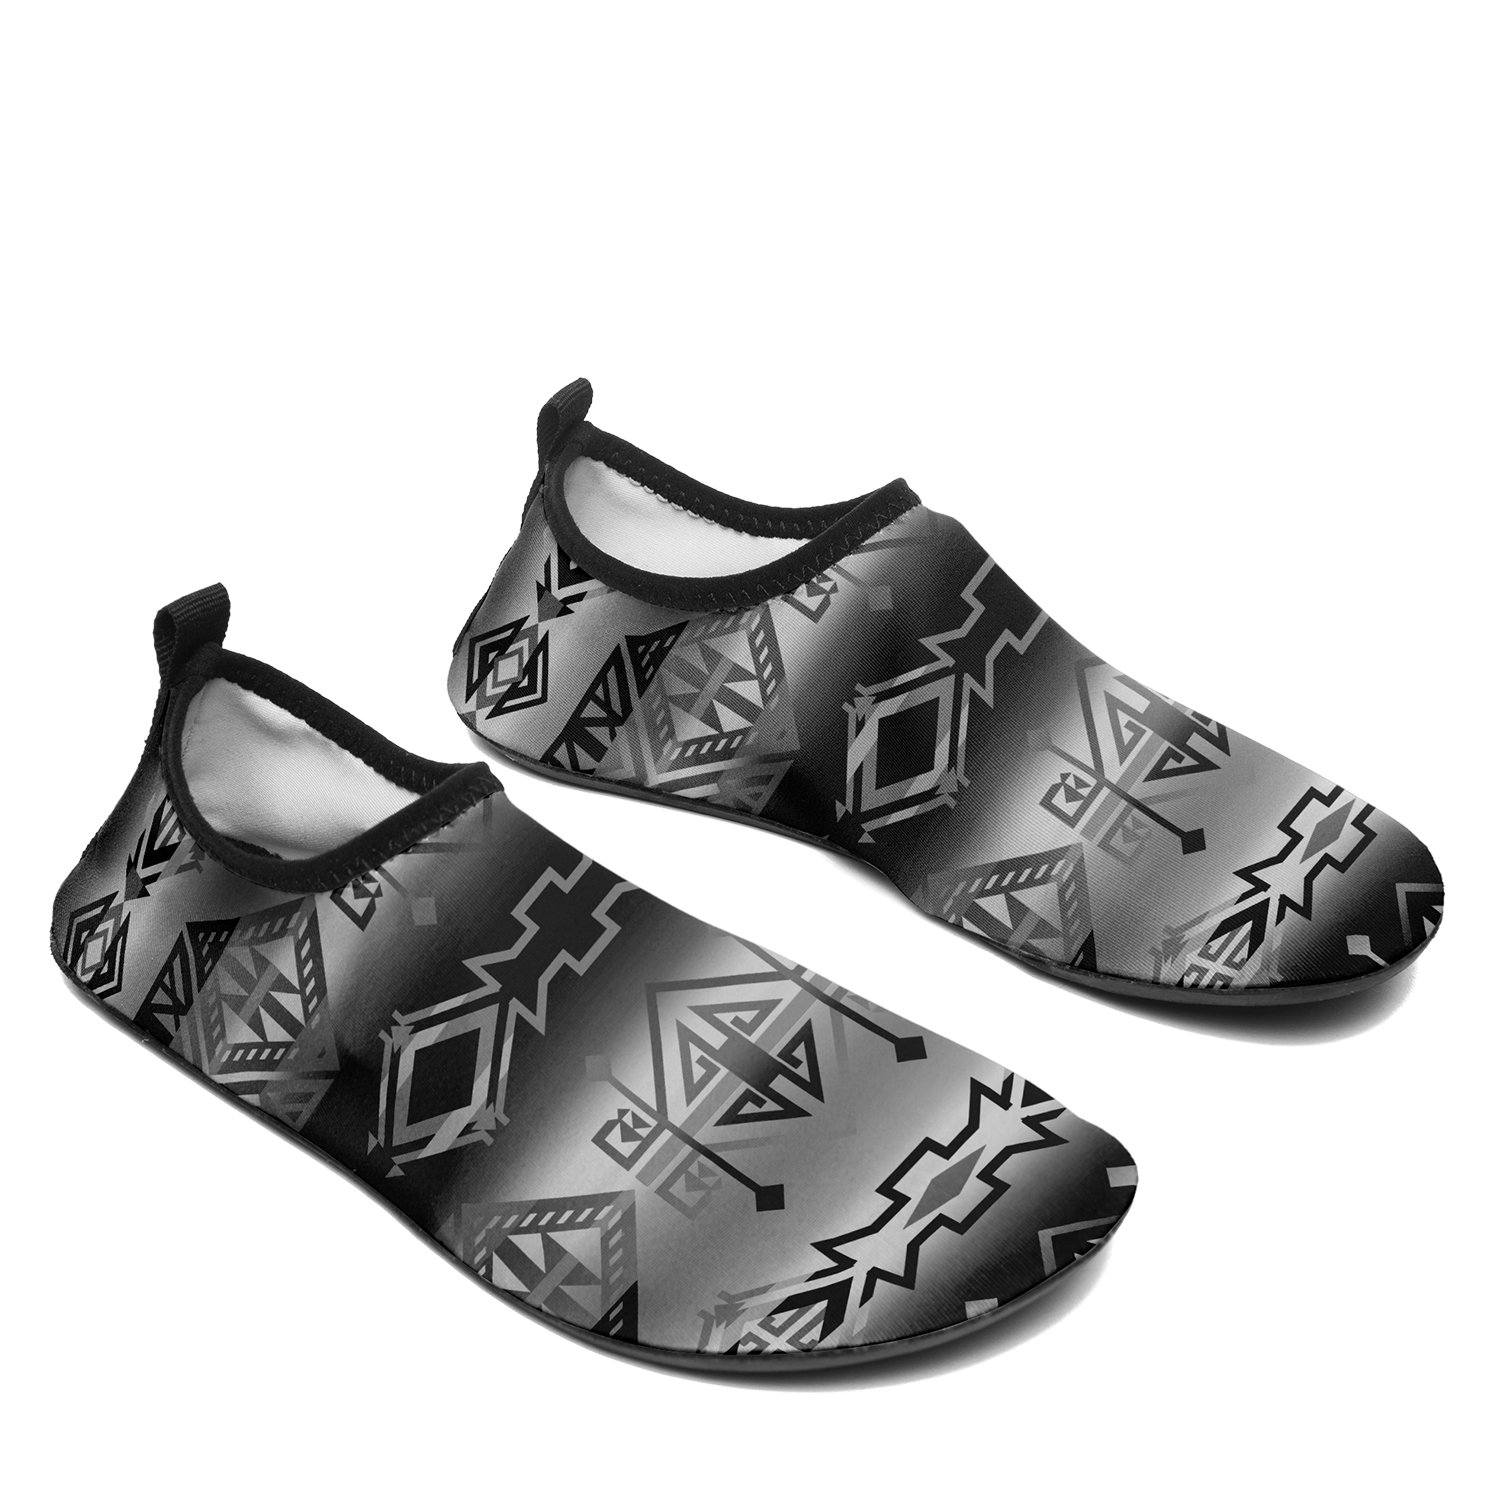 Trade Route Cave Sockamoccs Slip On Shoes 49 Dzine 